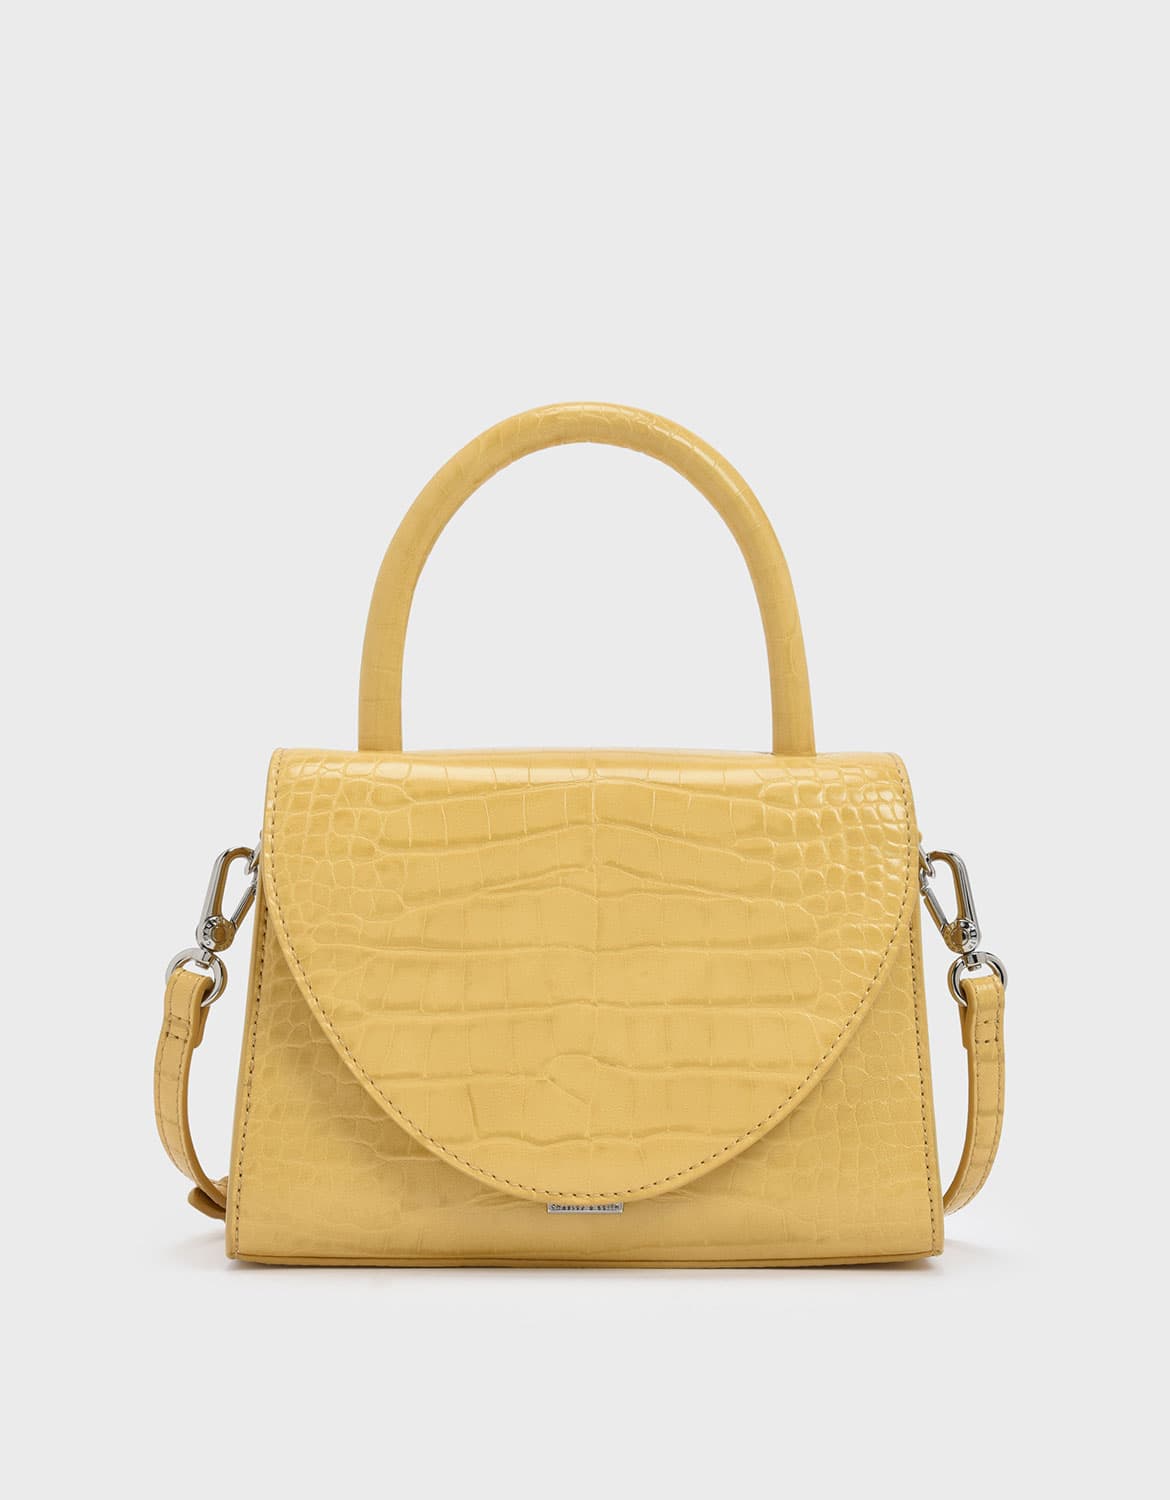 Women’s croc-effect structured top handle bag in yellow – CHARLES & KEITH